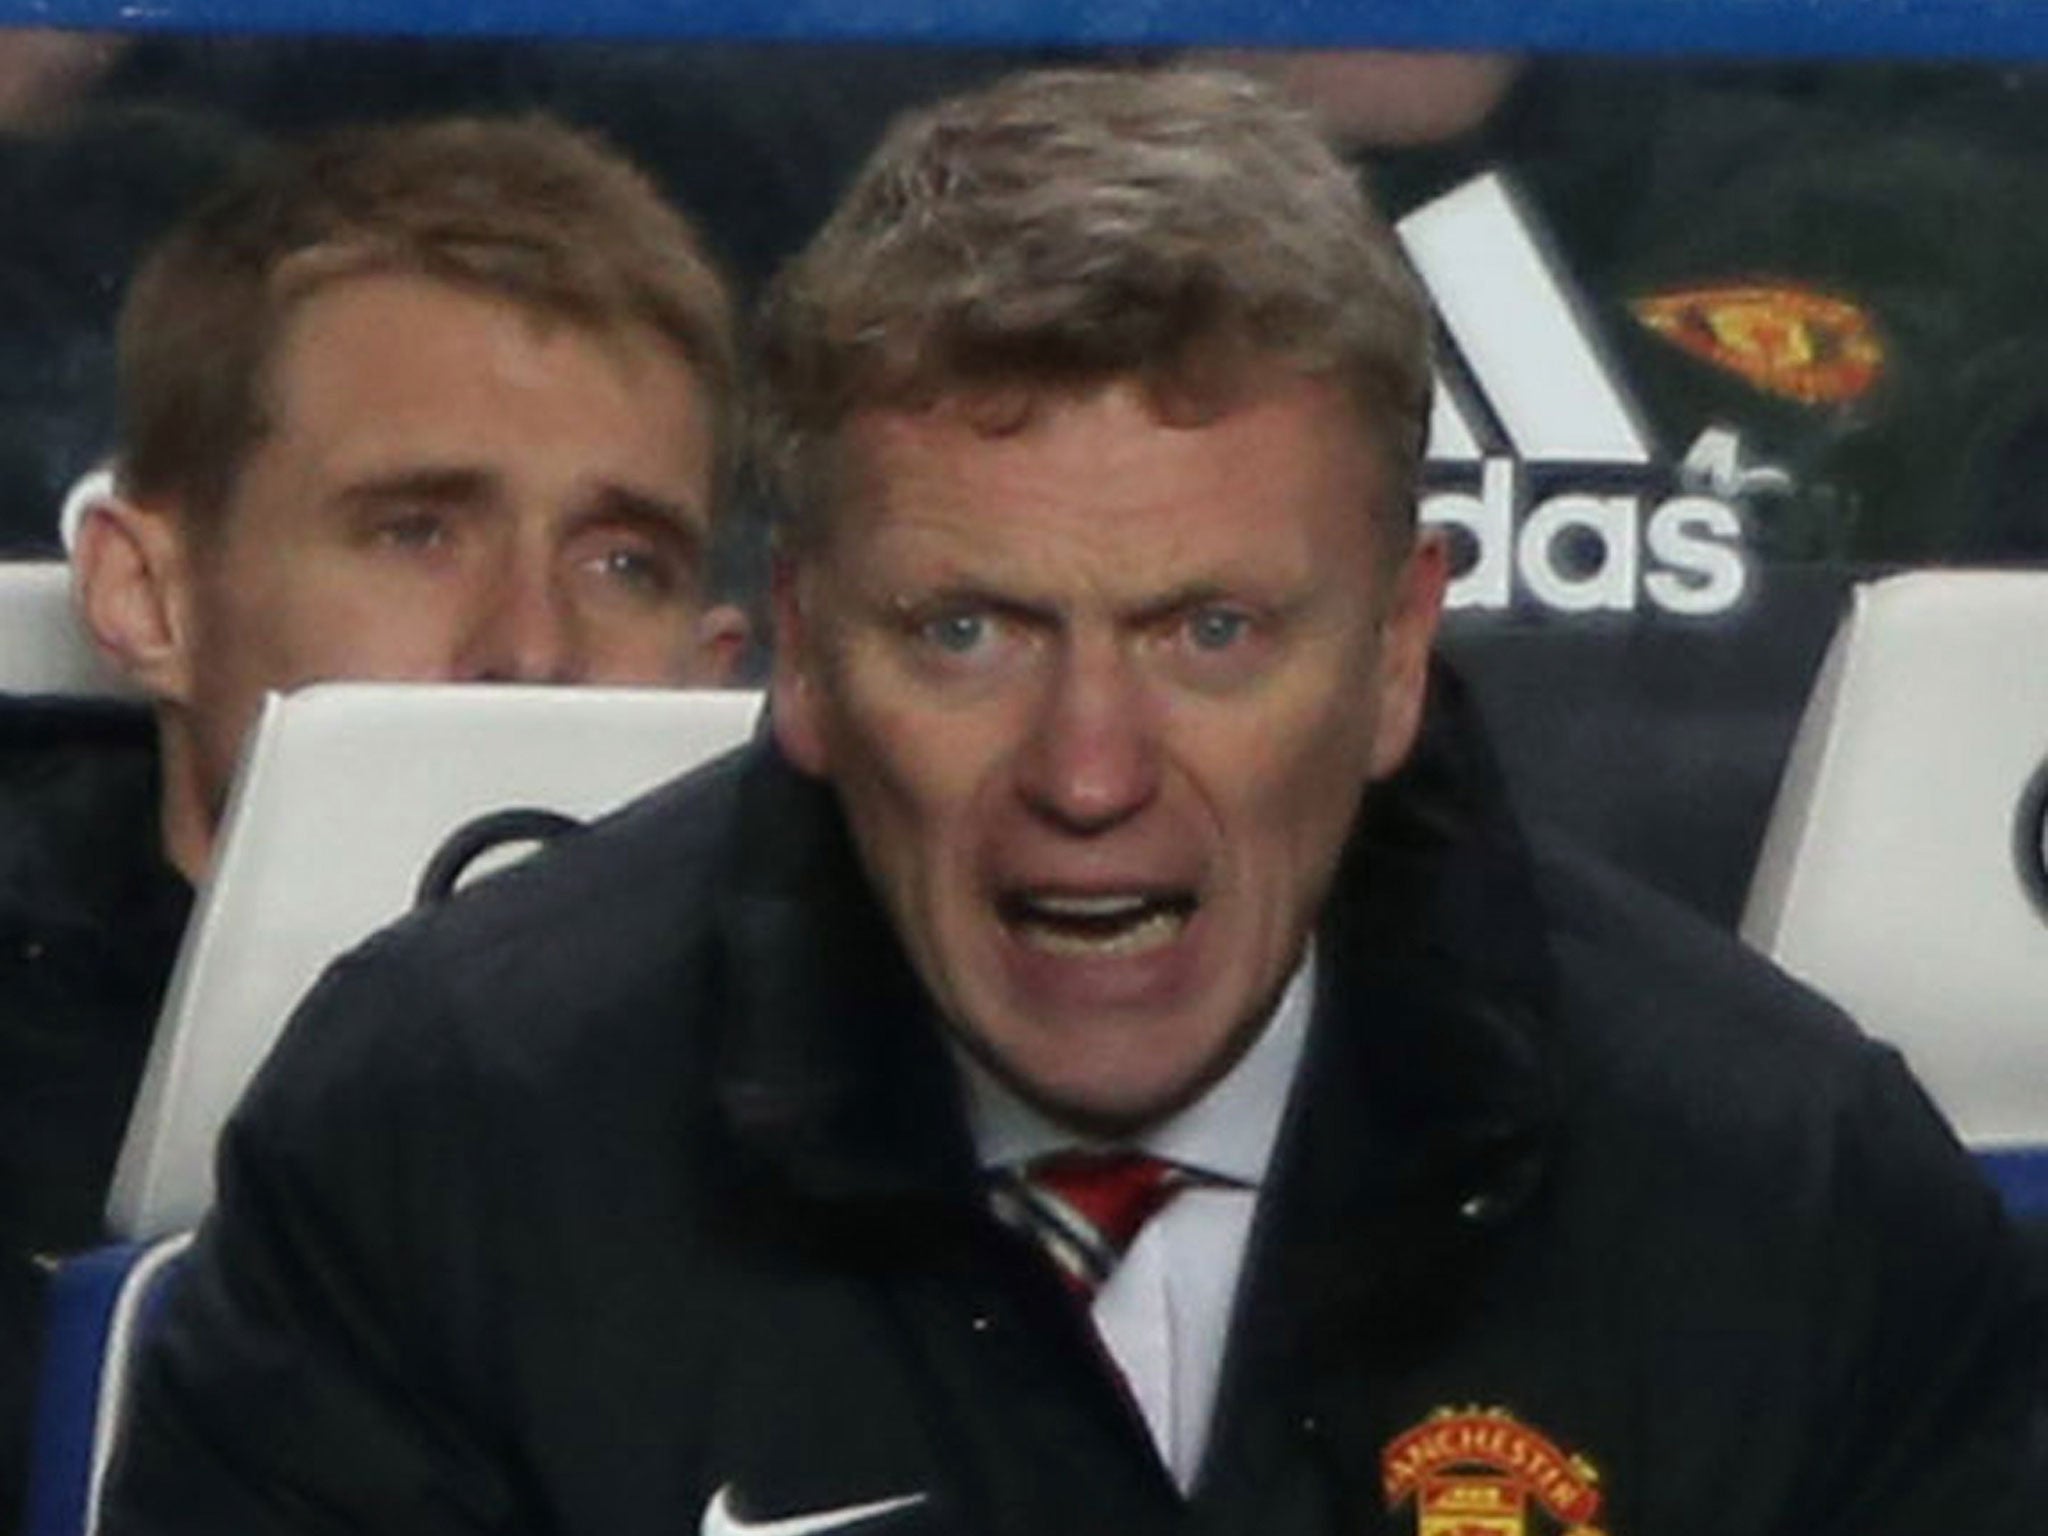 Manchester United manager David Moyes looks on in despair as his side crash to a 3-0 defeat at Chelsea